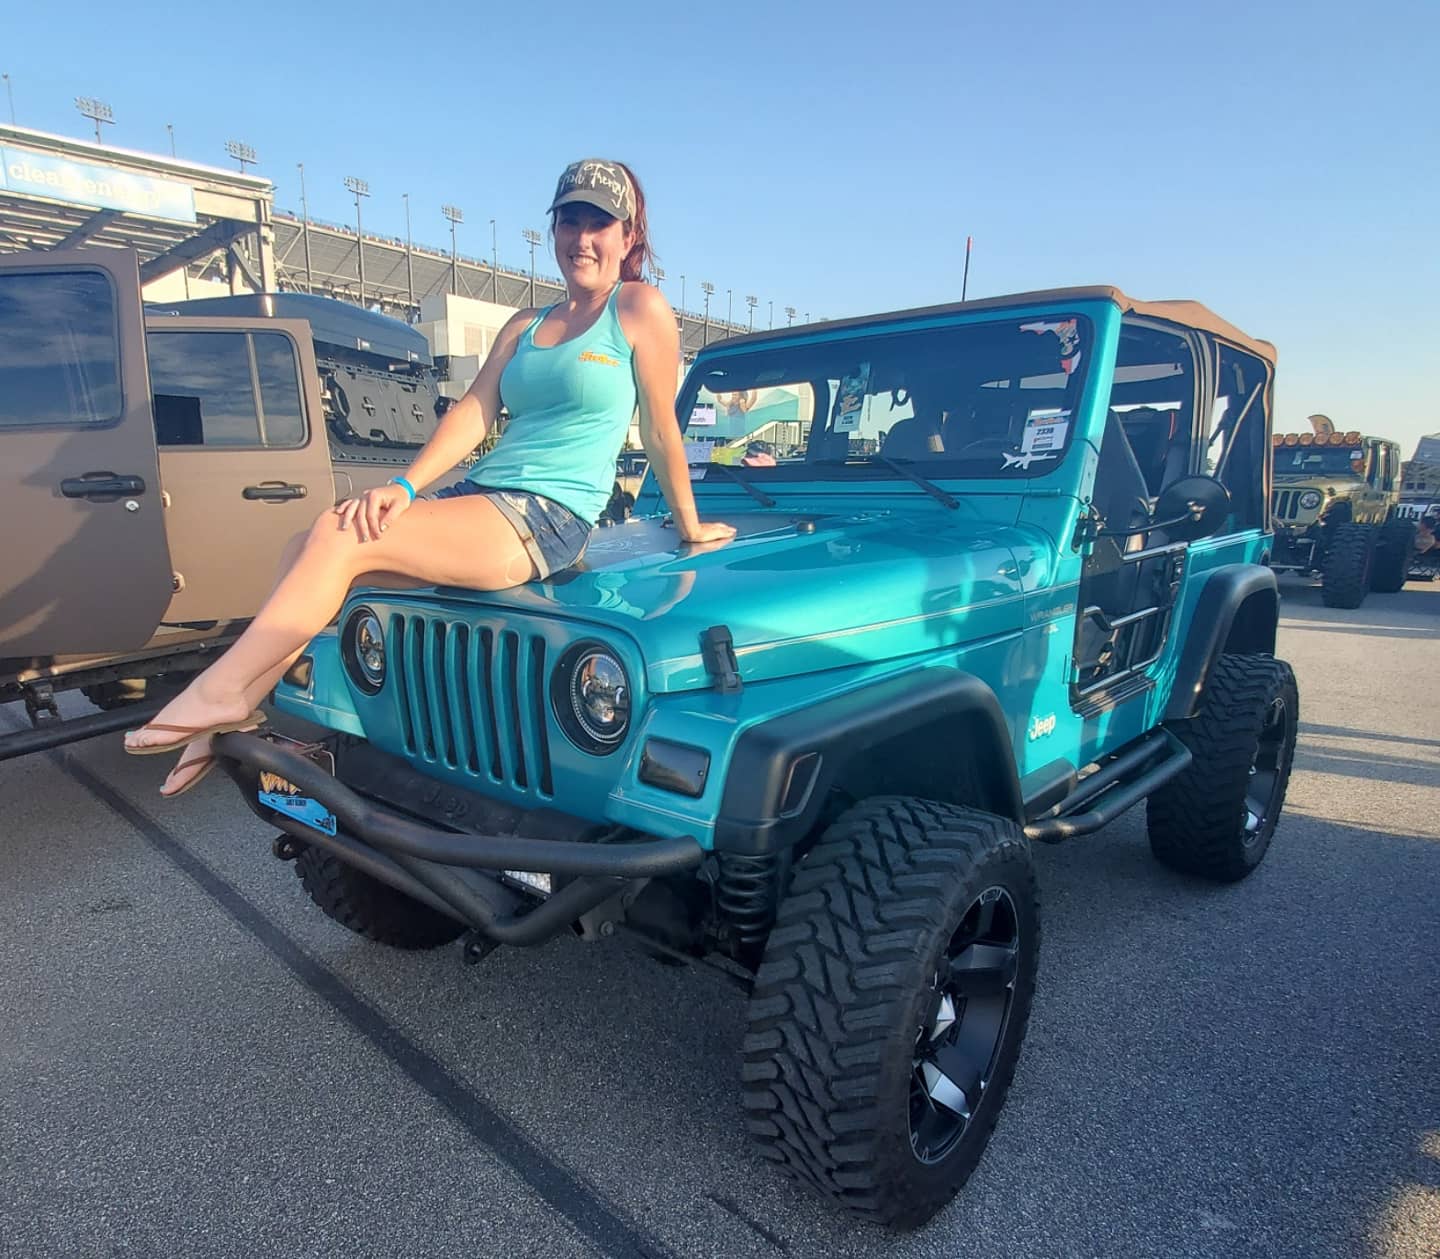 TEAL (bright jade satin glow) TJ OWNERS UNITE!!!!!!! | Page 5 | Jeep  Wrangler Forum